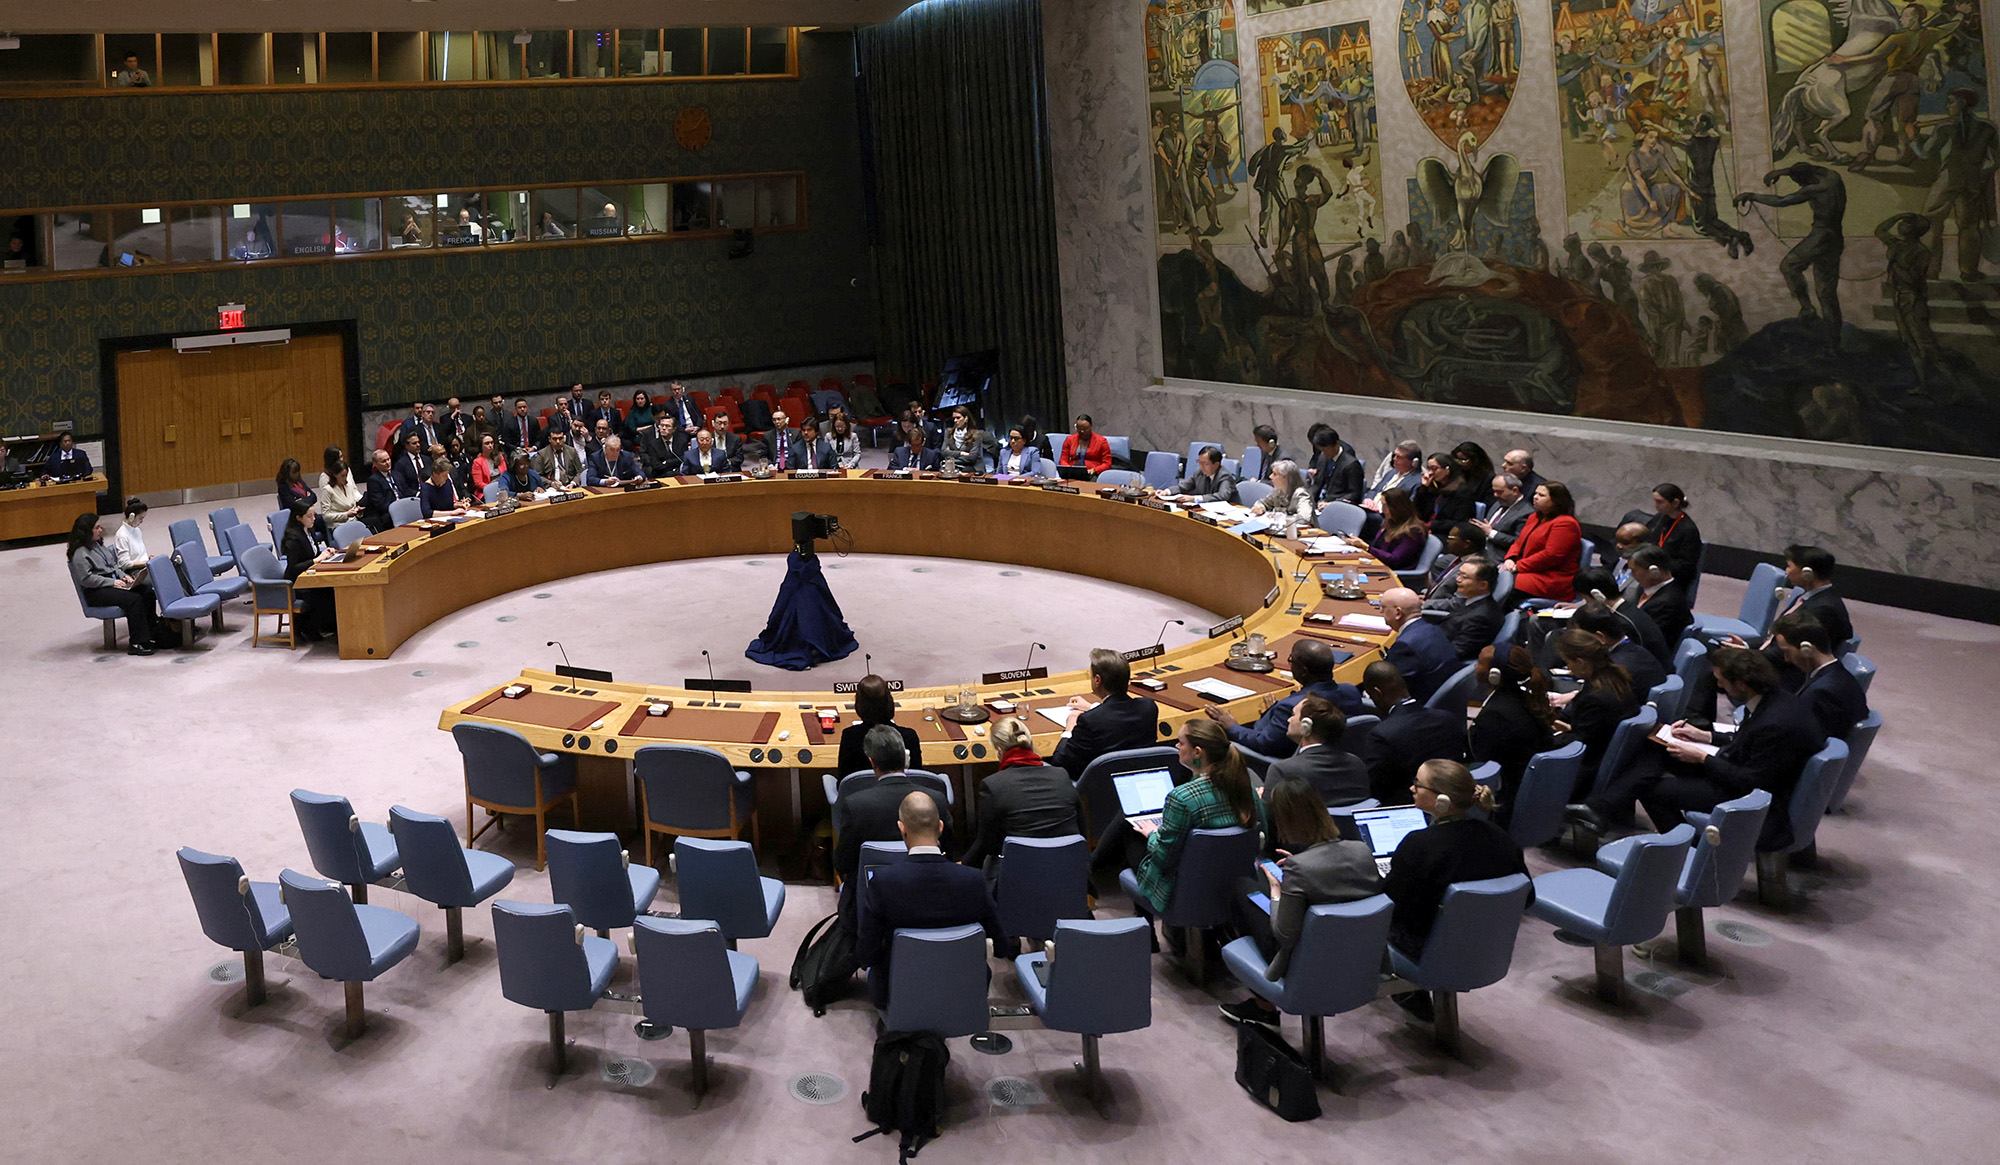 The United Nations Security Council meets to consider a United States-sponsored resolution calling for a ceasefire during the conflict between Israel and the Palestinian Islamist group Hamas, at U.N. headquarters in New York City on March 22.